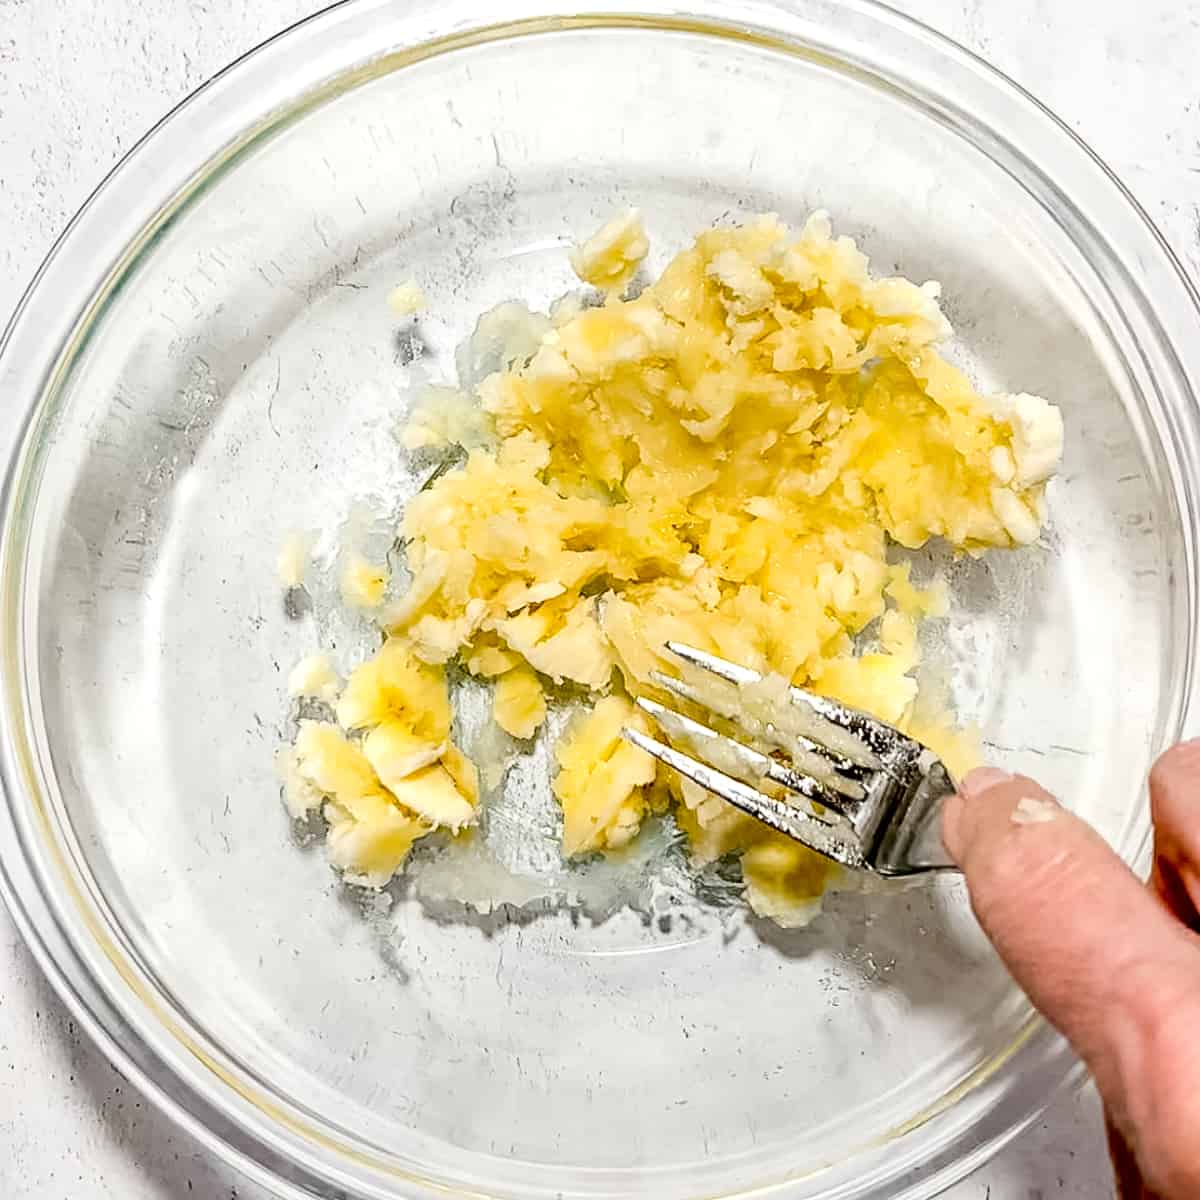 mashing banana in a bowl with fork.